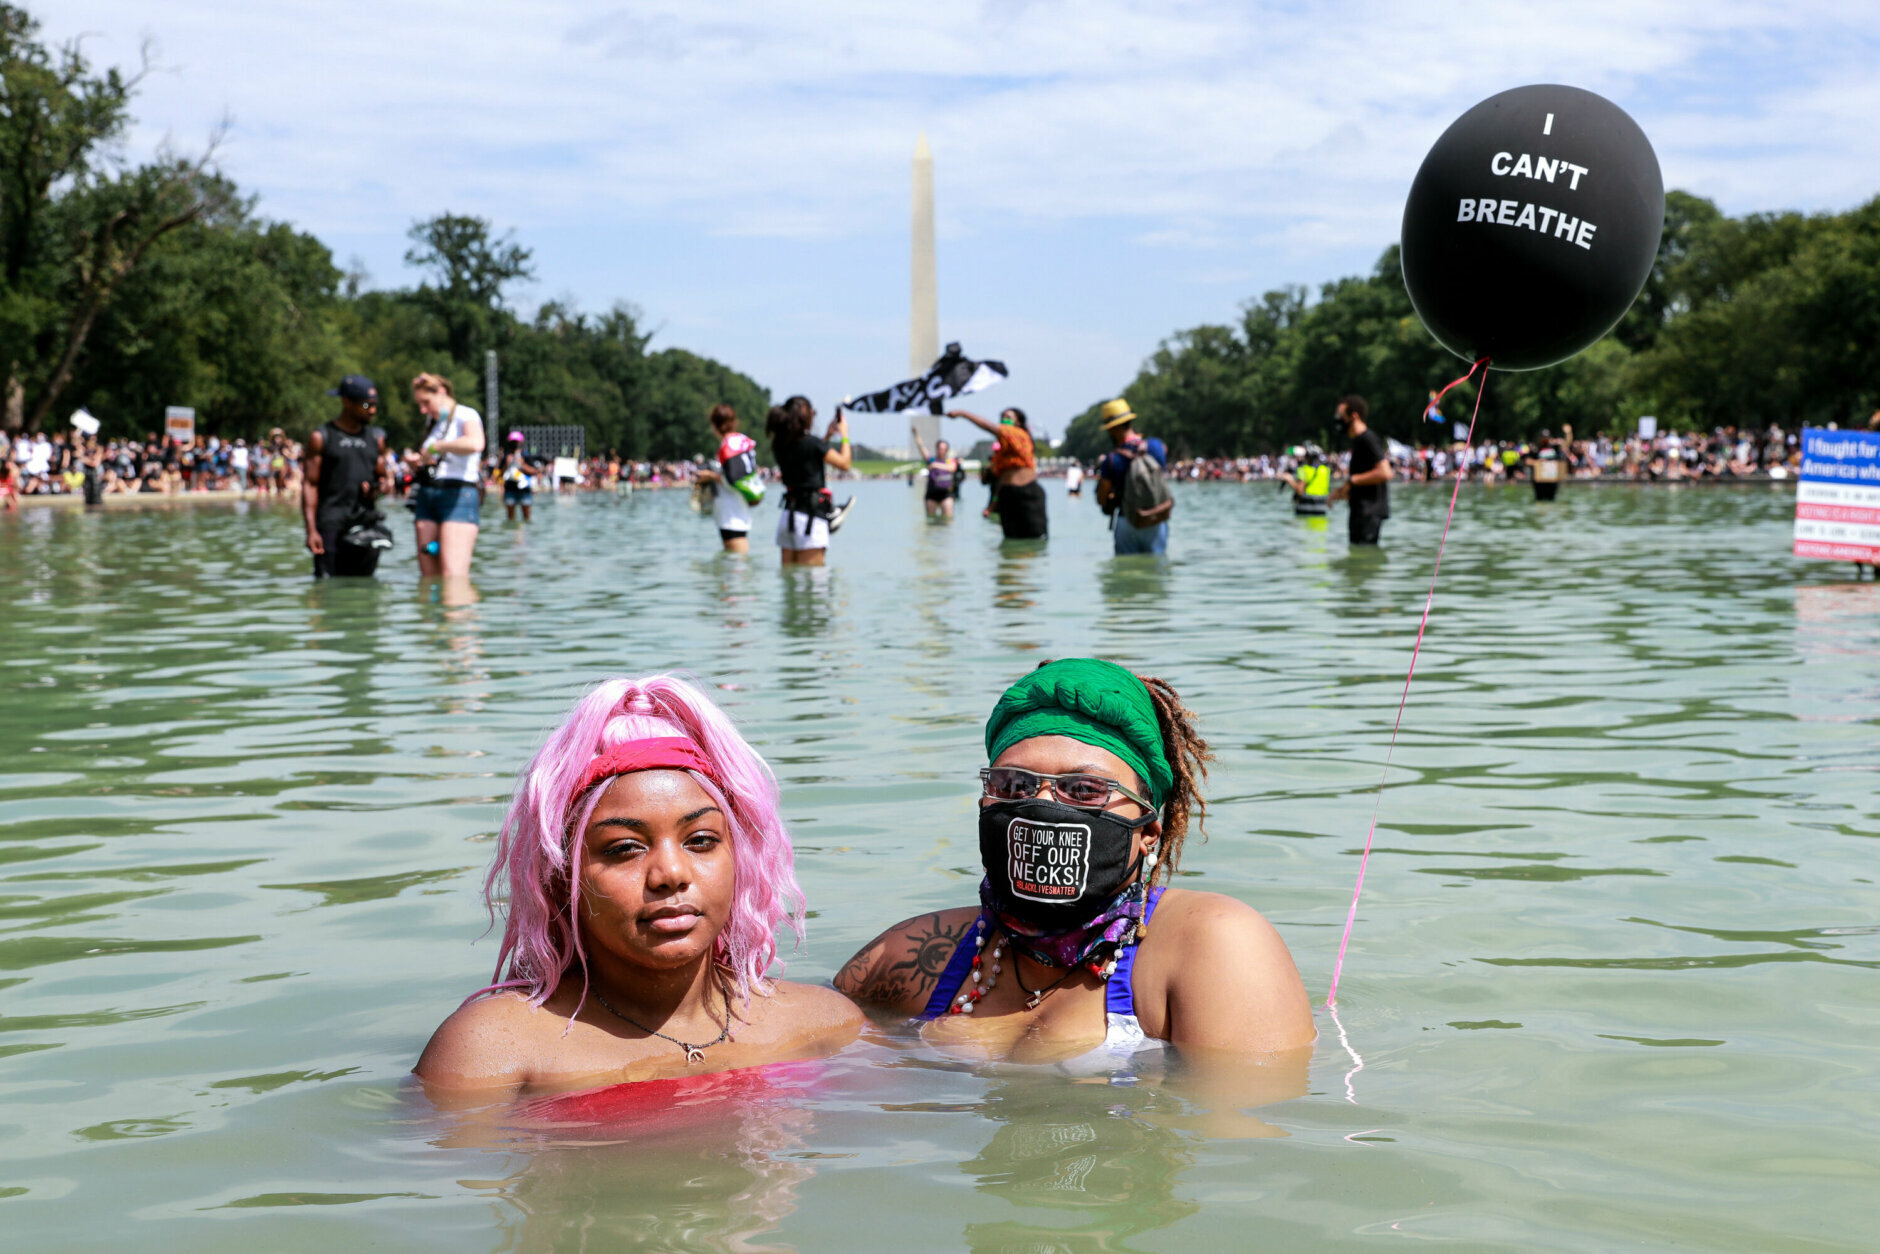 Demonstrators cooling off in the Lincoln Memorial Reflecting Pool.